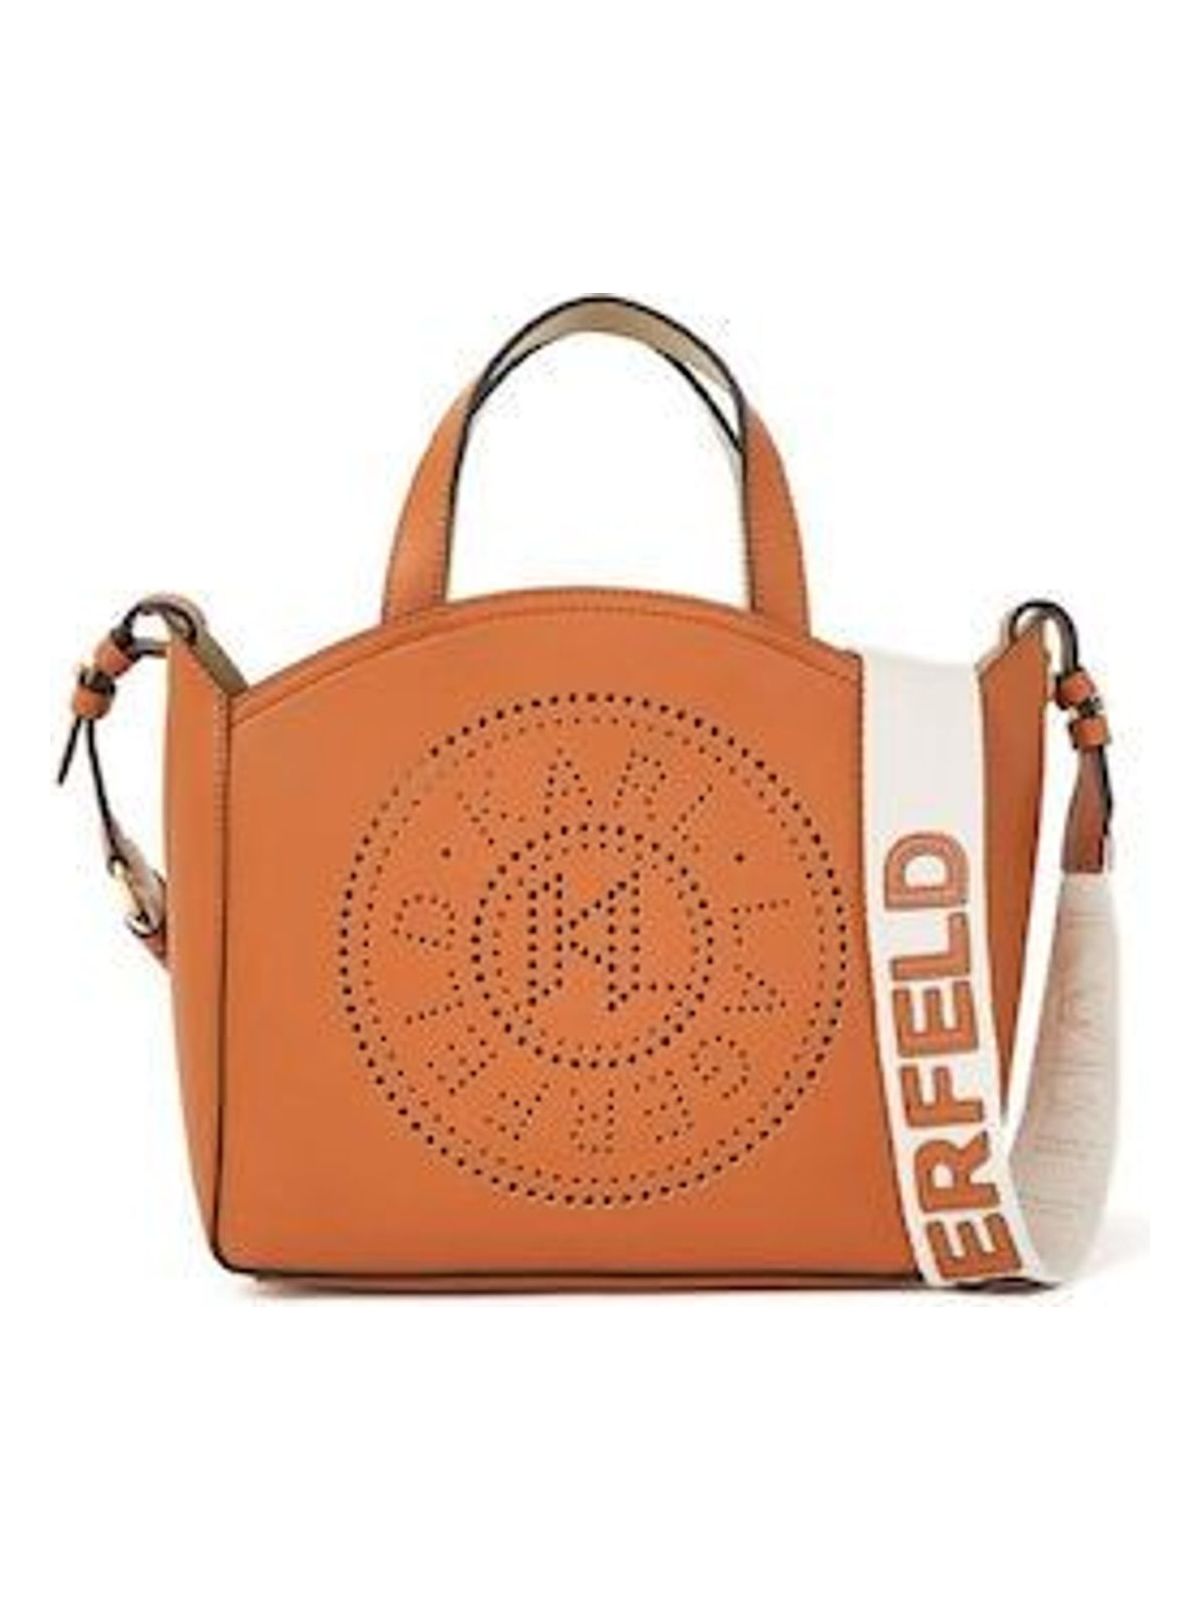 A774 KARL LAGERFELD BROWN TOTE WITH PERFORATED ROUND LOGO